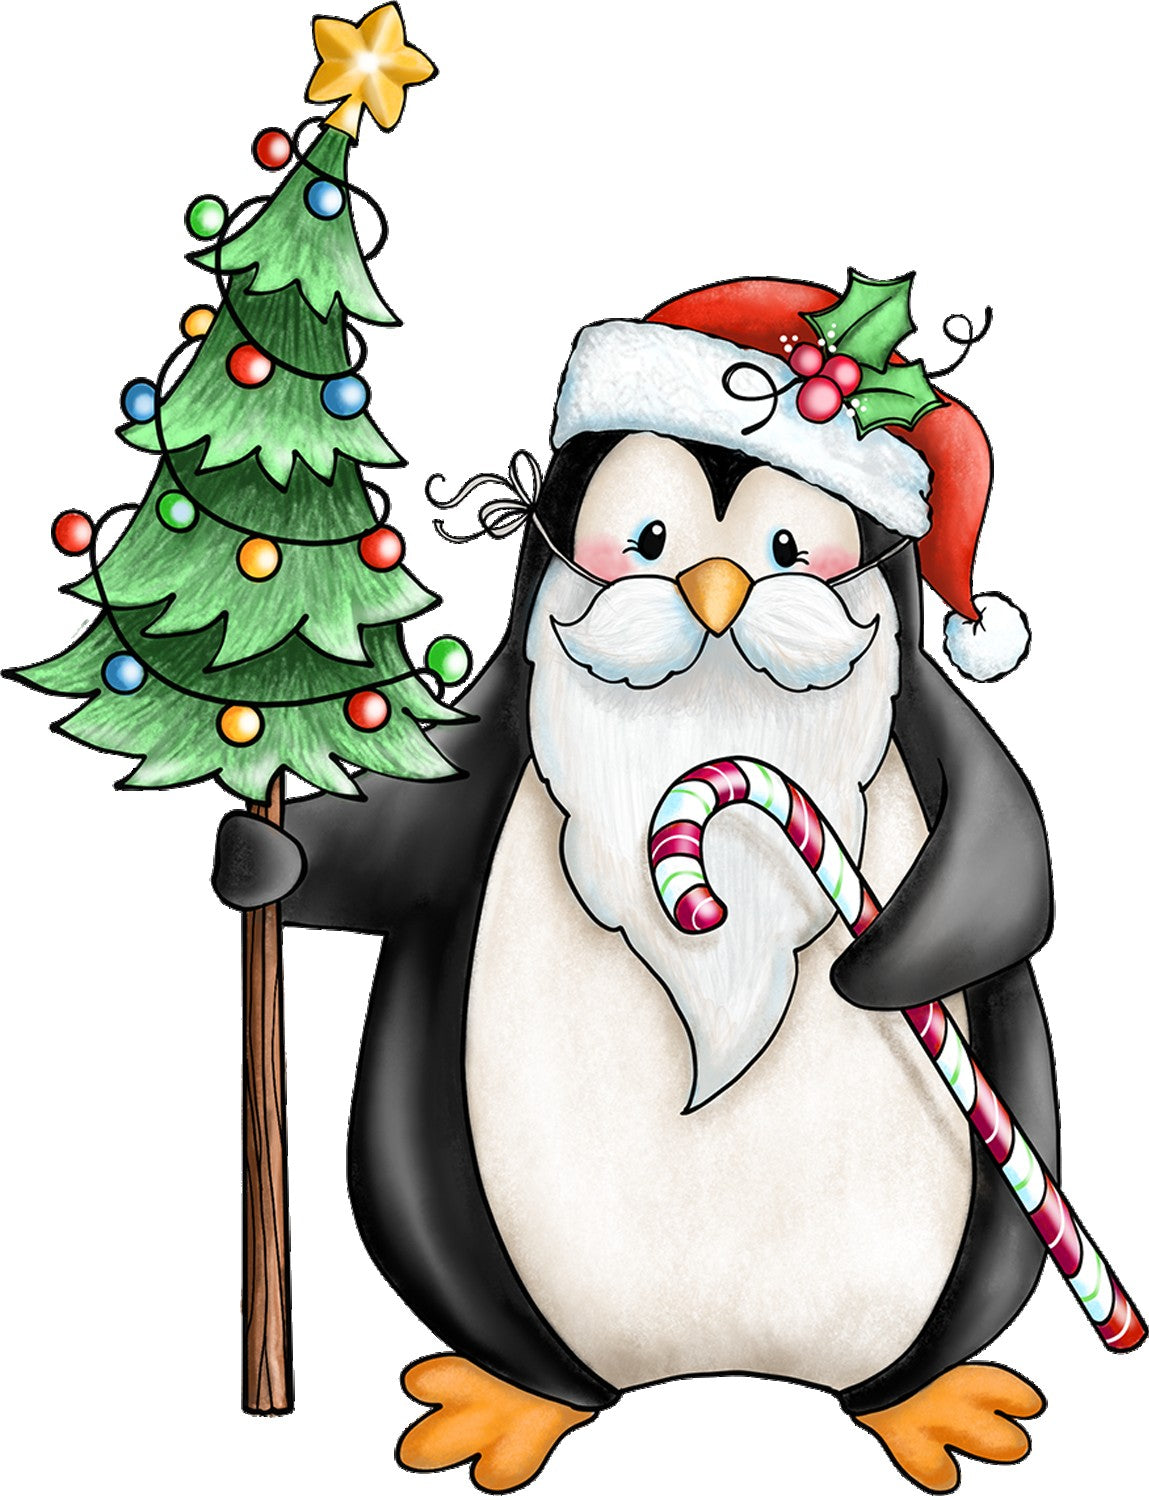 Santa penguin - Out of the Wood